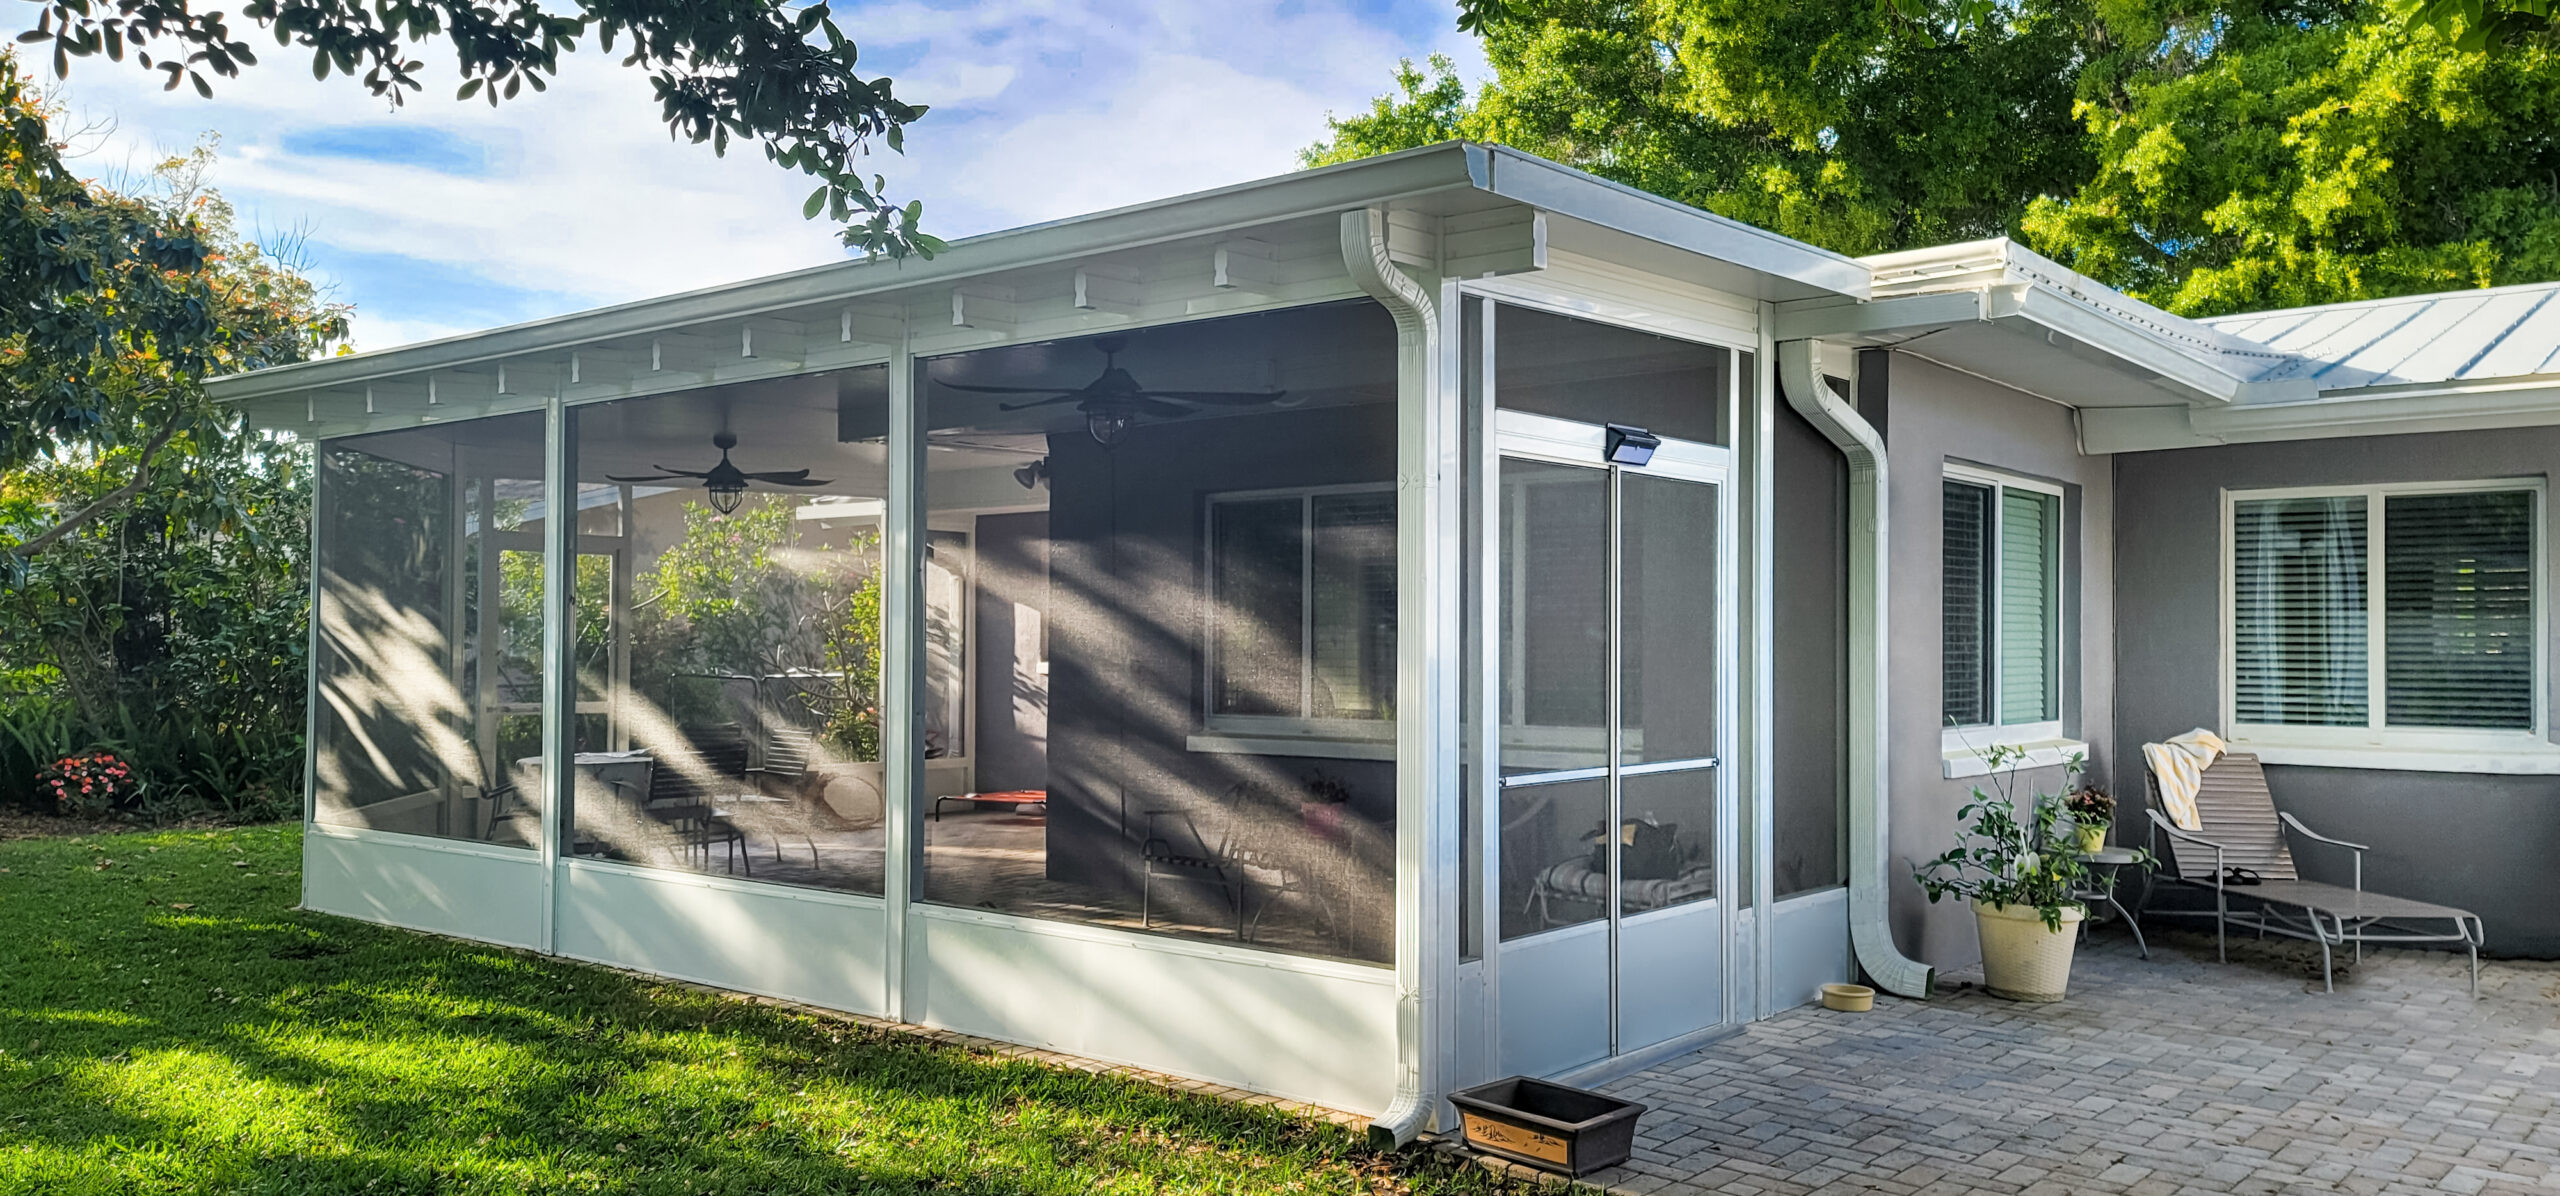 Austin Screen Rooms vs. Sunrooms: Which Is Best for Your Home?